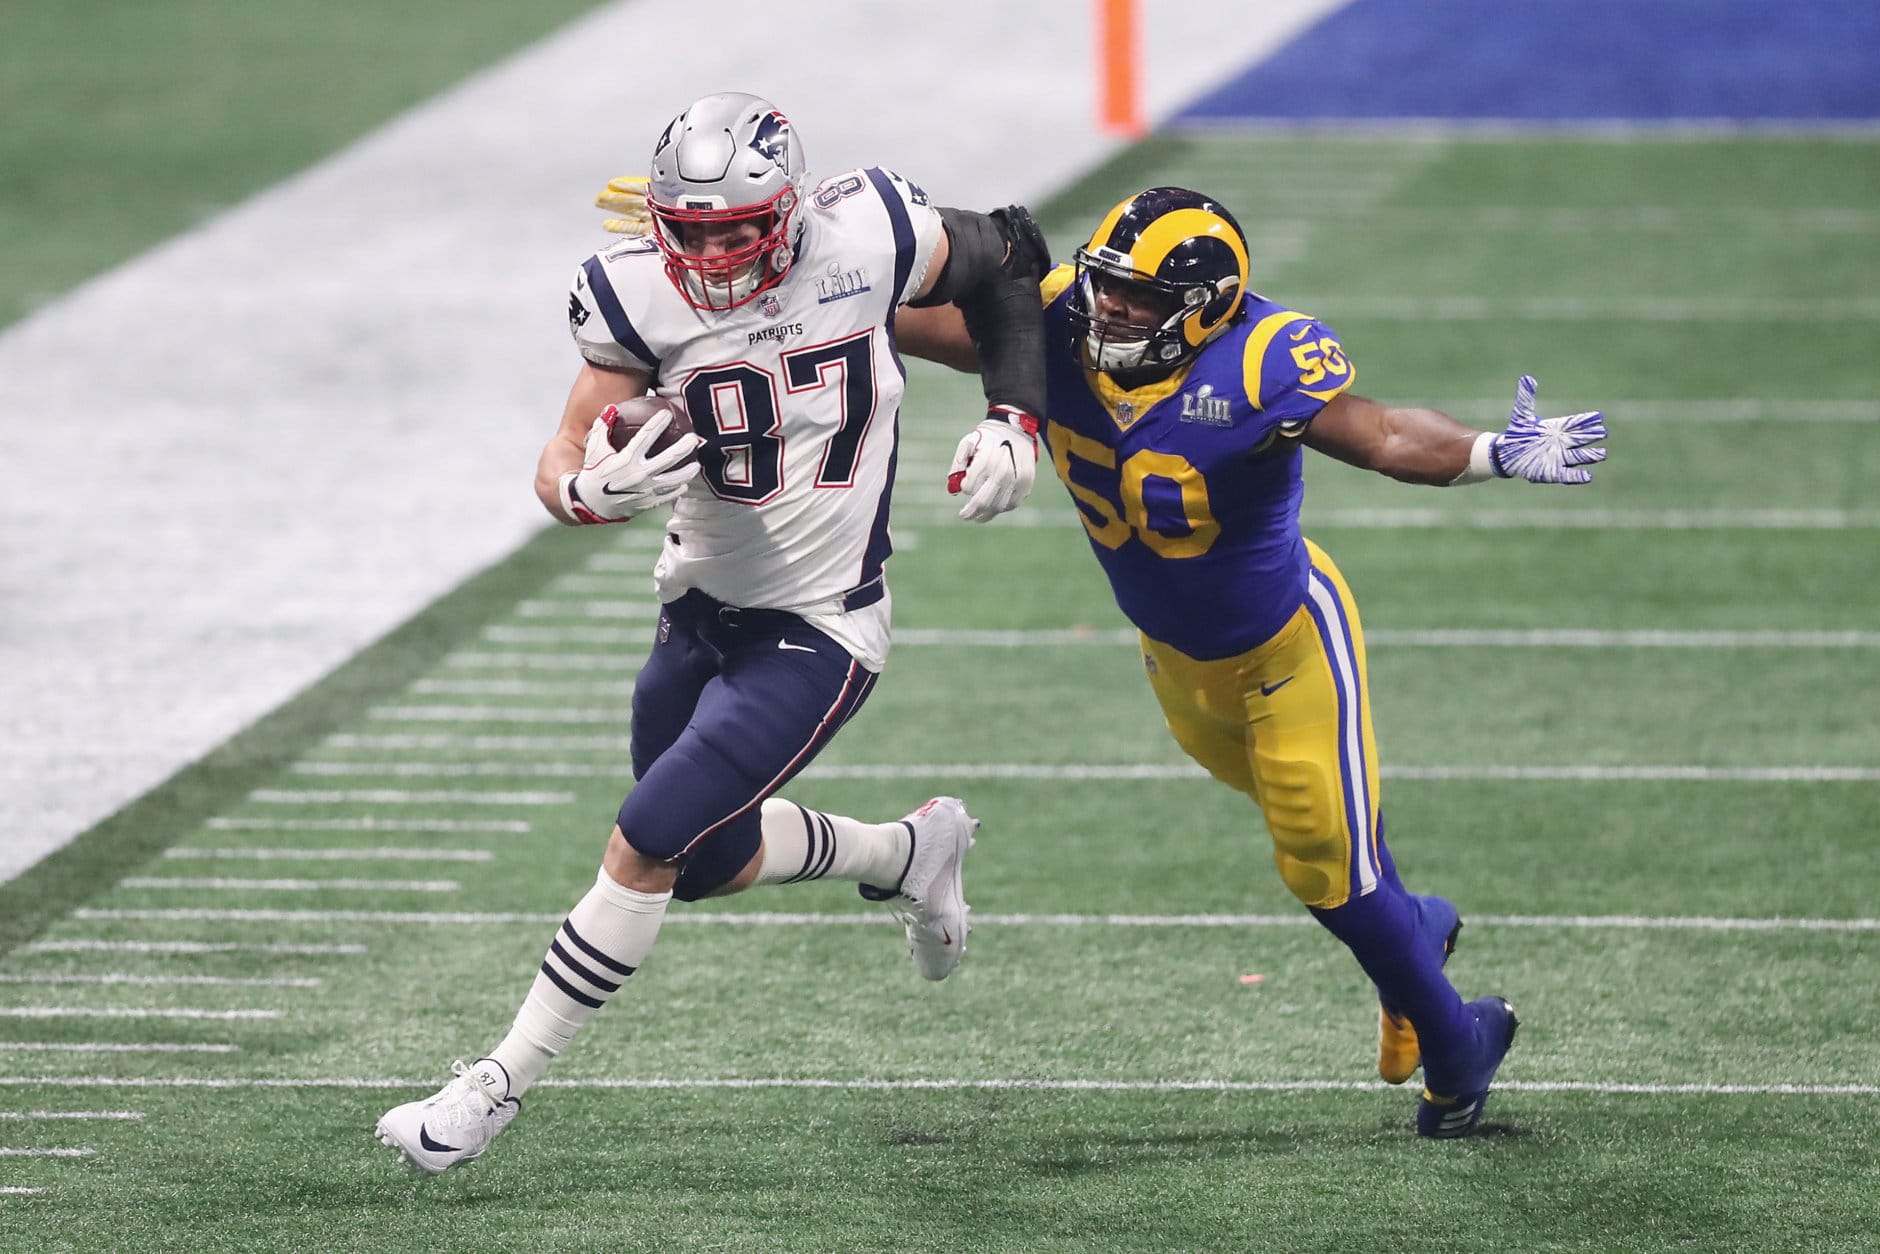 ATLANTA, GA - FEBRUARY 03:  Rob Gronkowski #87 of the New England Patriots makes a catch against Samson Ebukam #50 of the Los Angeles Rams in the second half during Super Bowl LIII at Mercedes-Benz Stadium on February 3, 2019 in Atlanta, Georgia.  (Photo by Elsa/Getty Images)